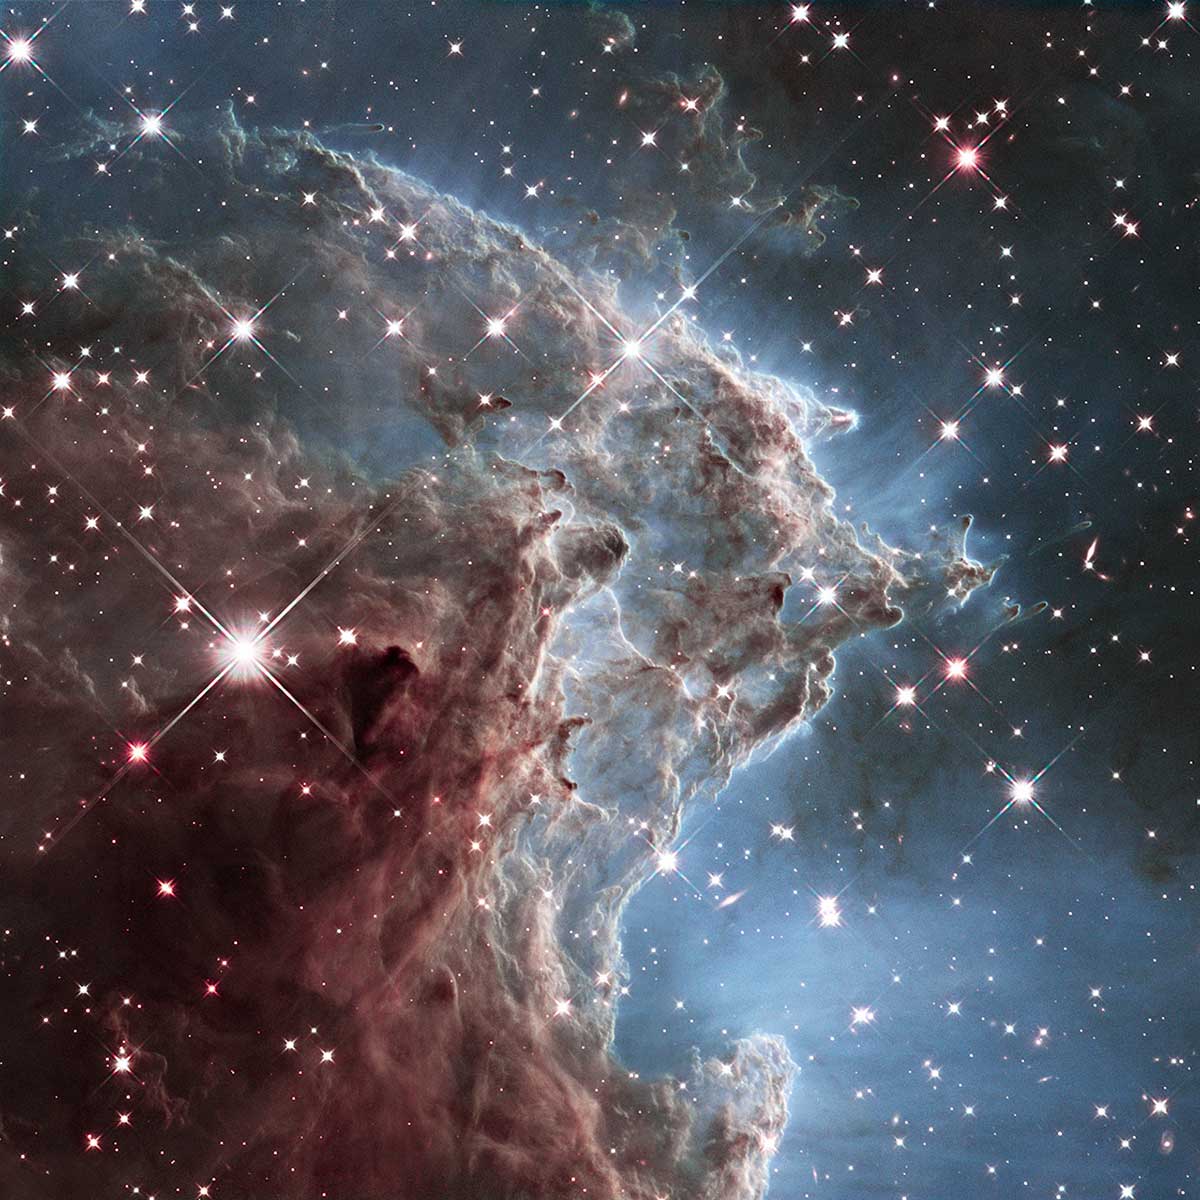 An infrared image of a small portion of the Monkey Head Nebula captured by the Hubble telescope released on March 17, 2014.